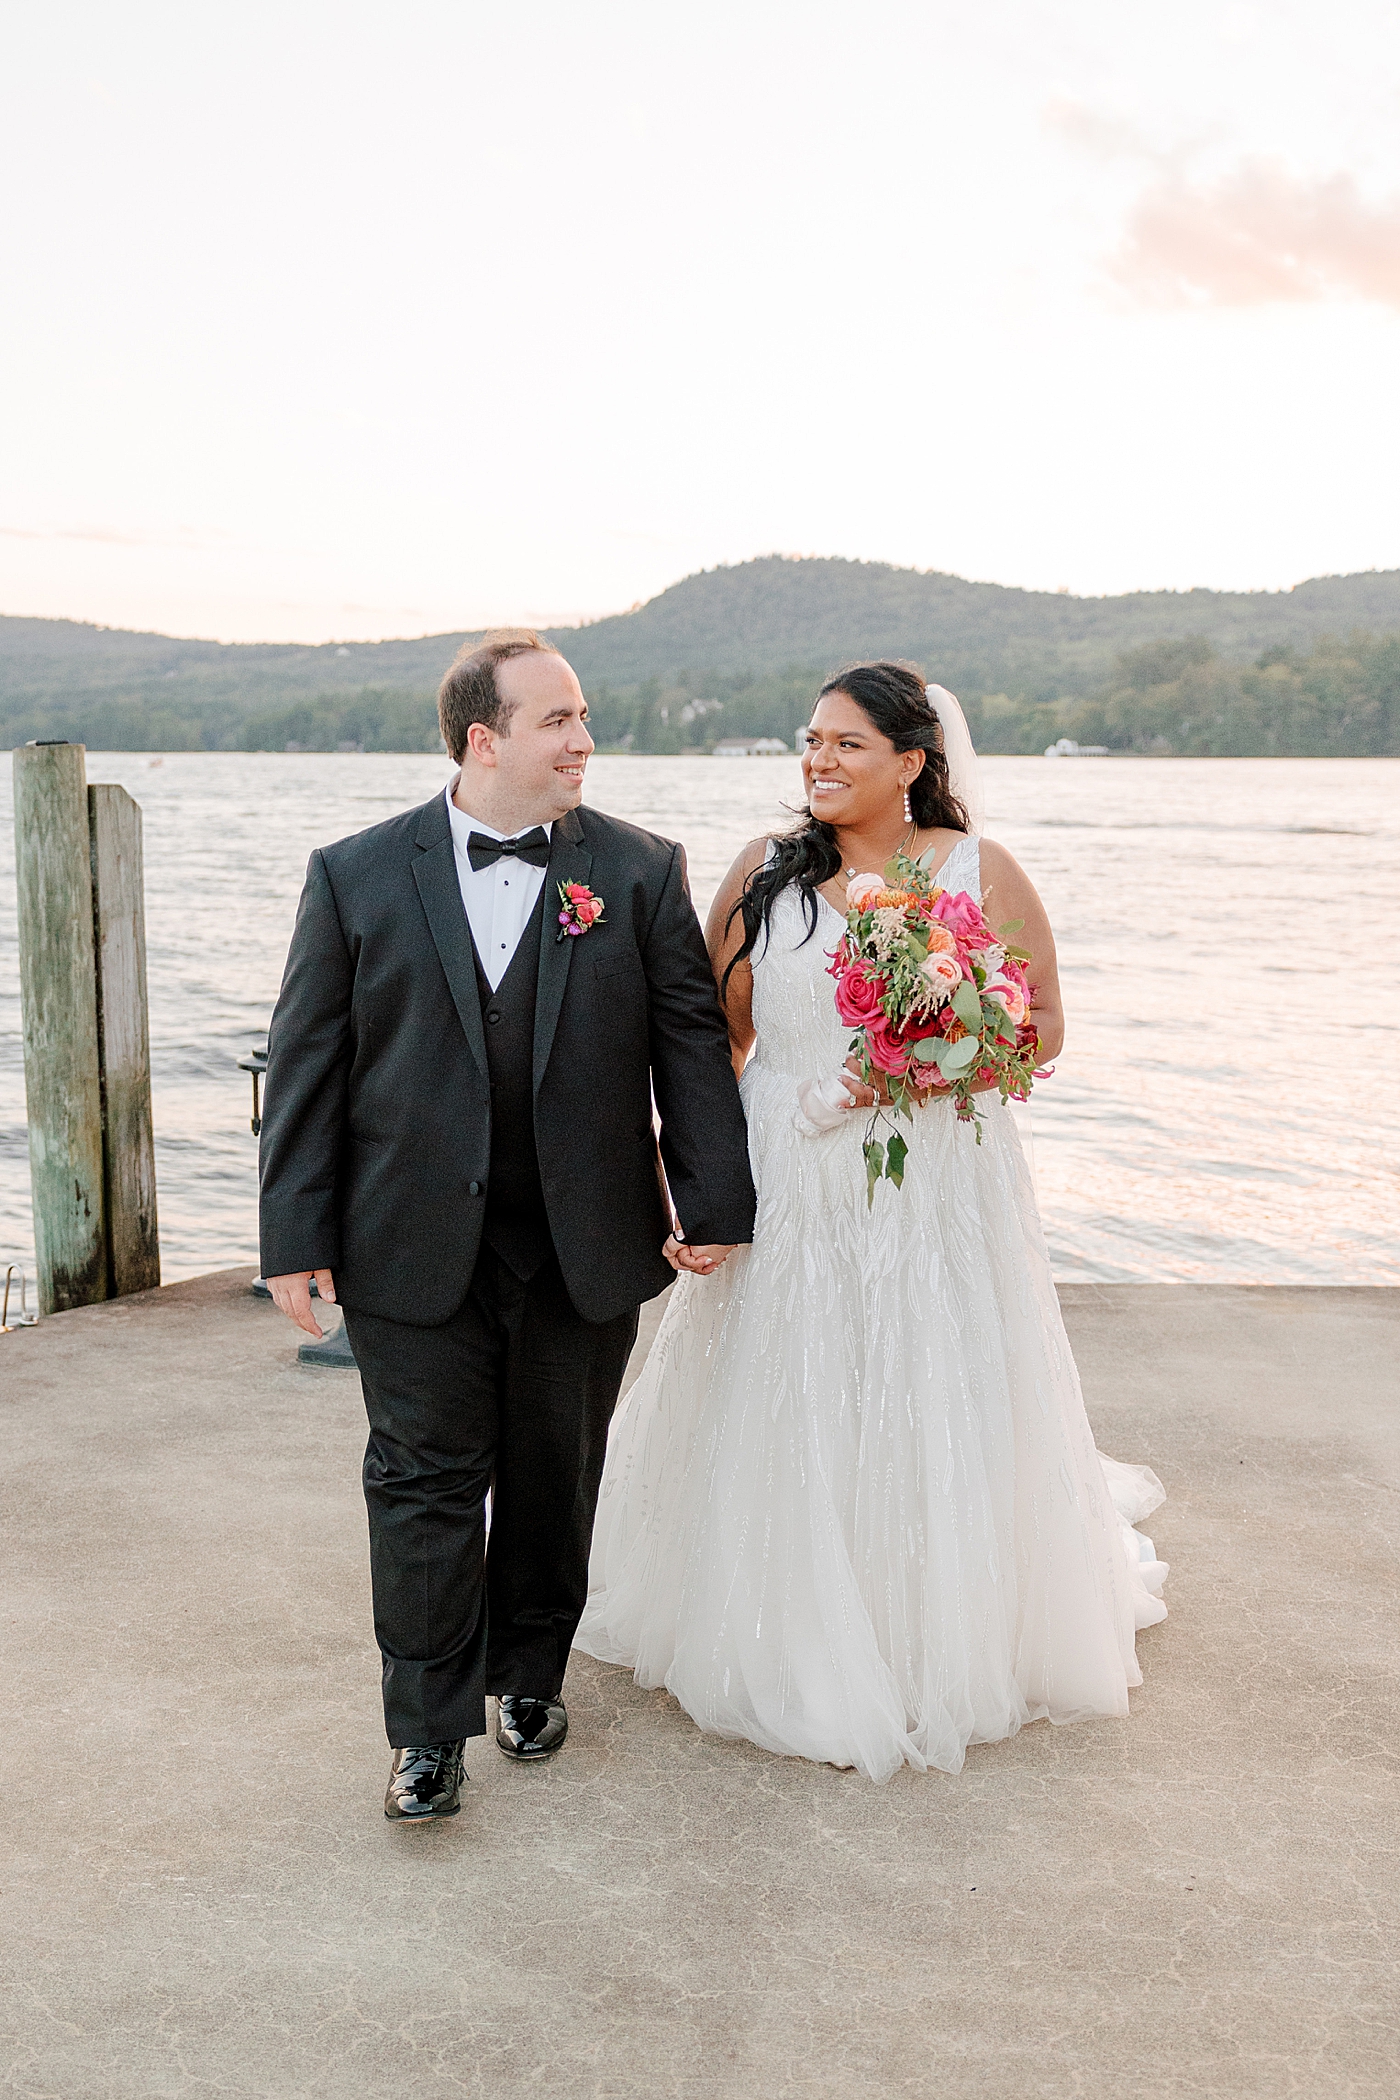 Bride and groom posing, smiling at each other on a dock at sunset during their Sagamore Wedding | Image by Hope Helmuth Photography